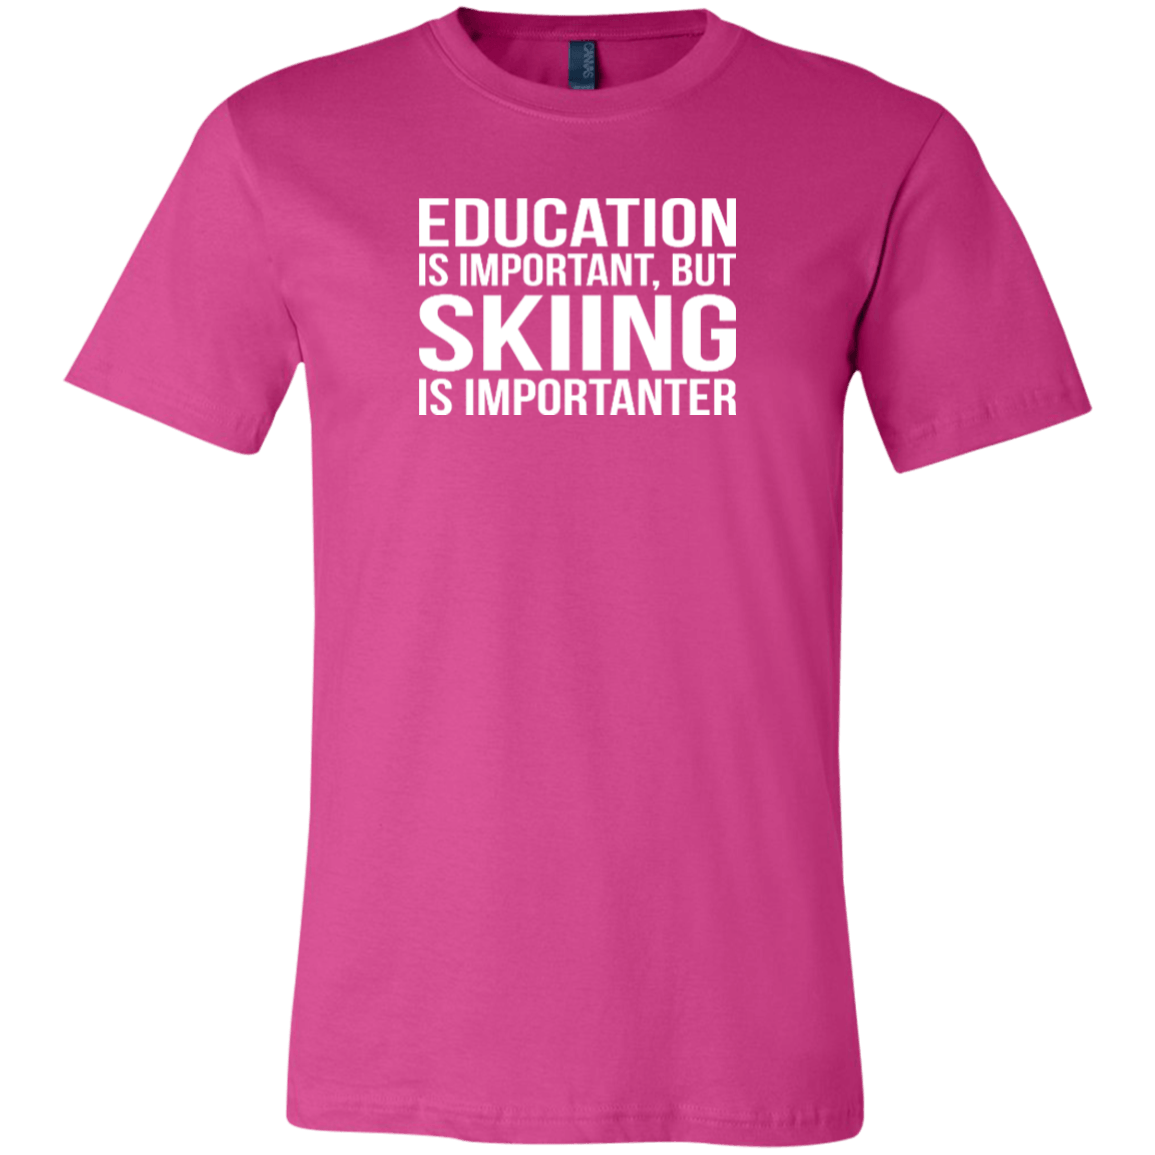 Education Is Important But Skiing Is Importanter Youth Tees - Powderaddicts